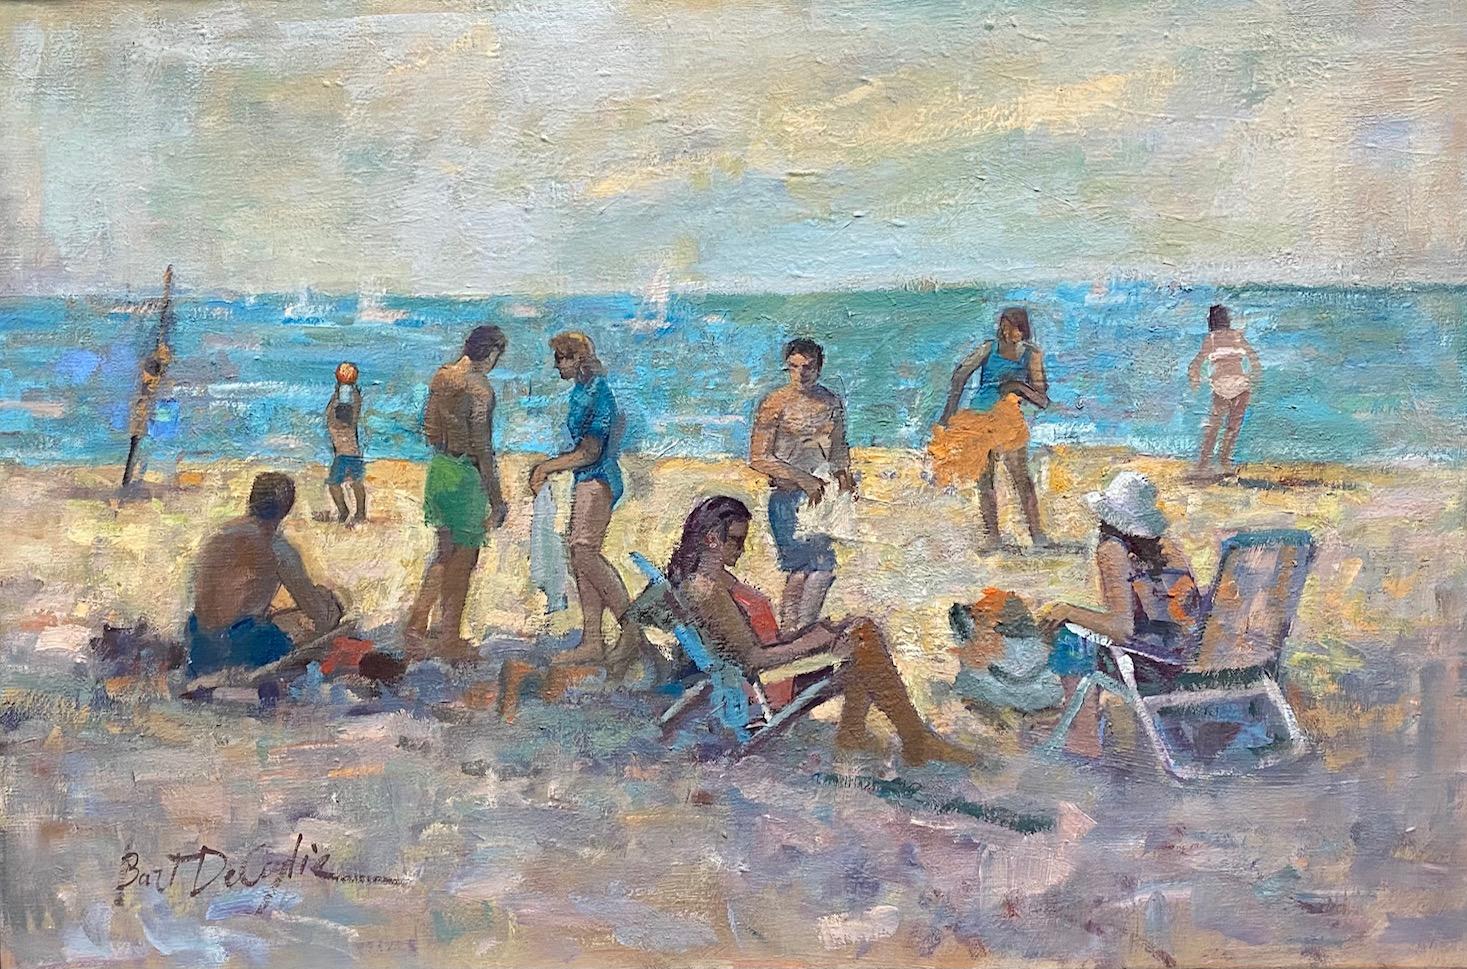 Another Day at the Beach, original 20x30 figurative marine landscape - Painting by Bart DeCeglie